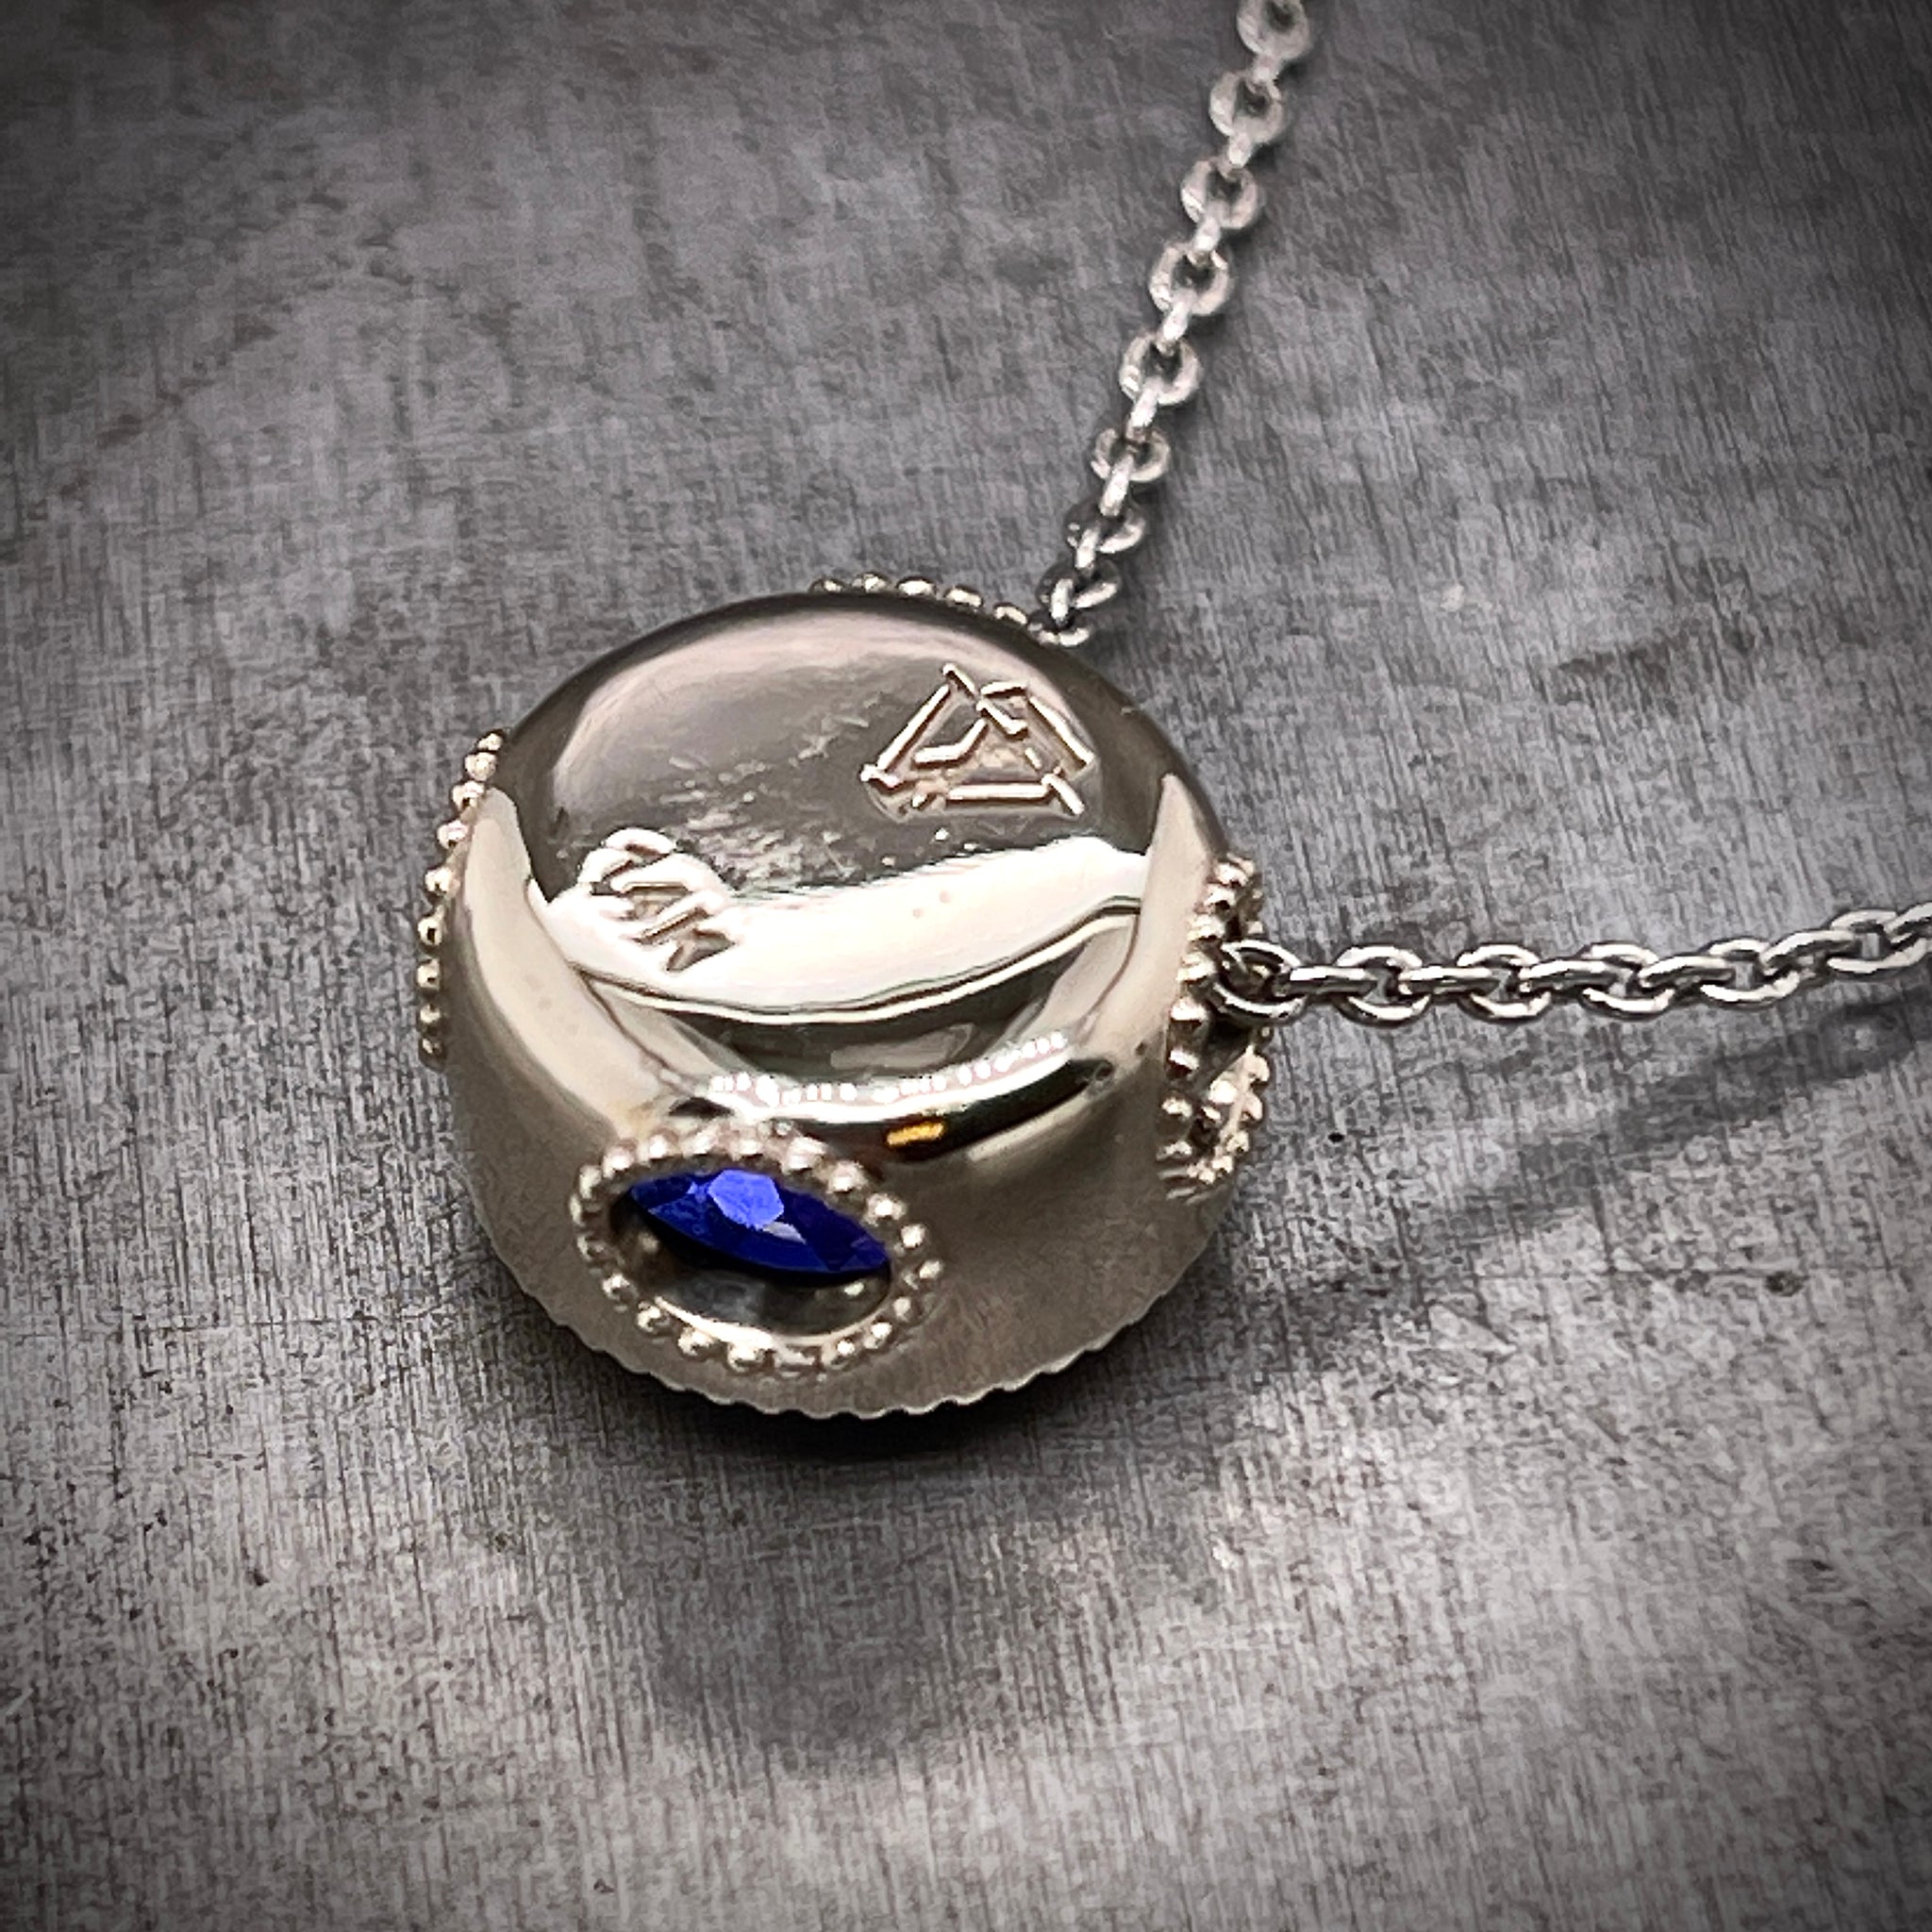 Rear View of 14K White Gold Tanzanite Necklace, showing WTJ Maker's Mark and and 14K Stamp